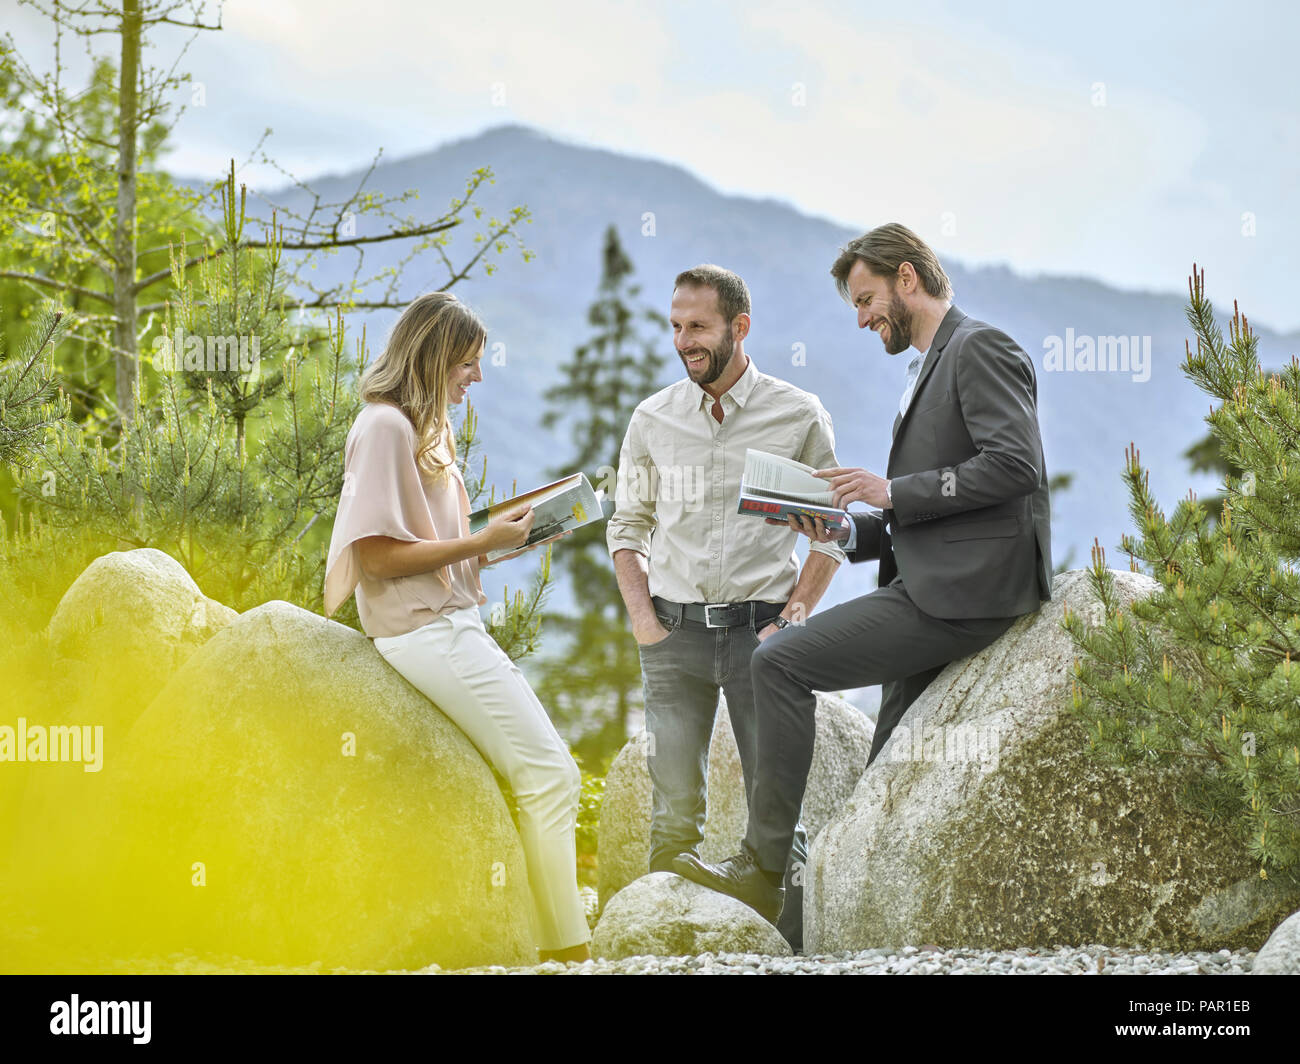 Smiling colleagues with magazines having a break at rocks Stock Photo